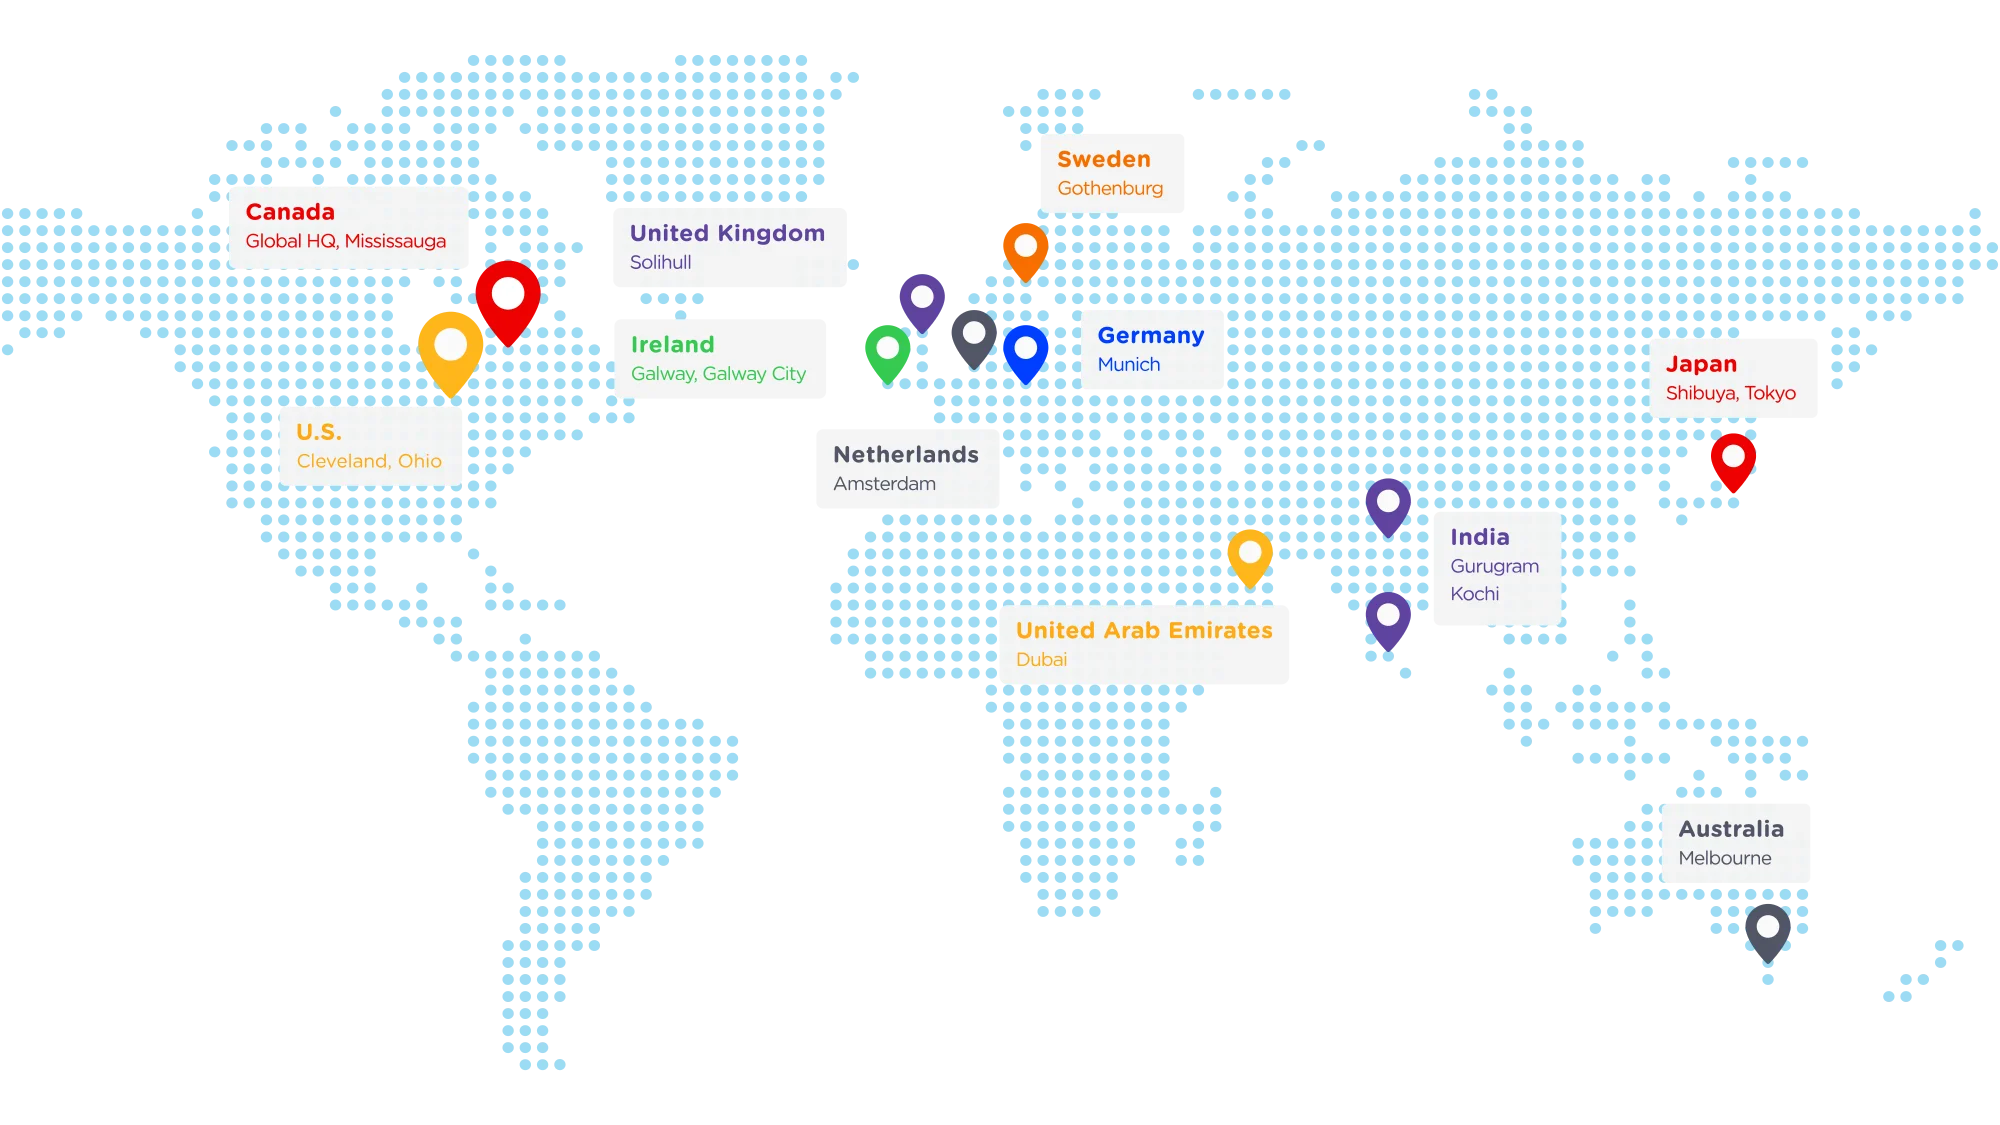 soti global office locations pins on world map